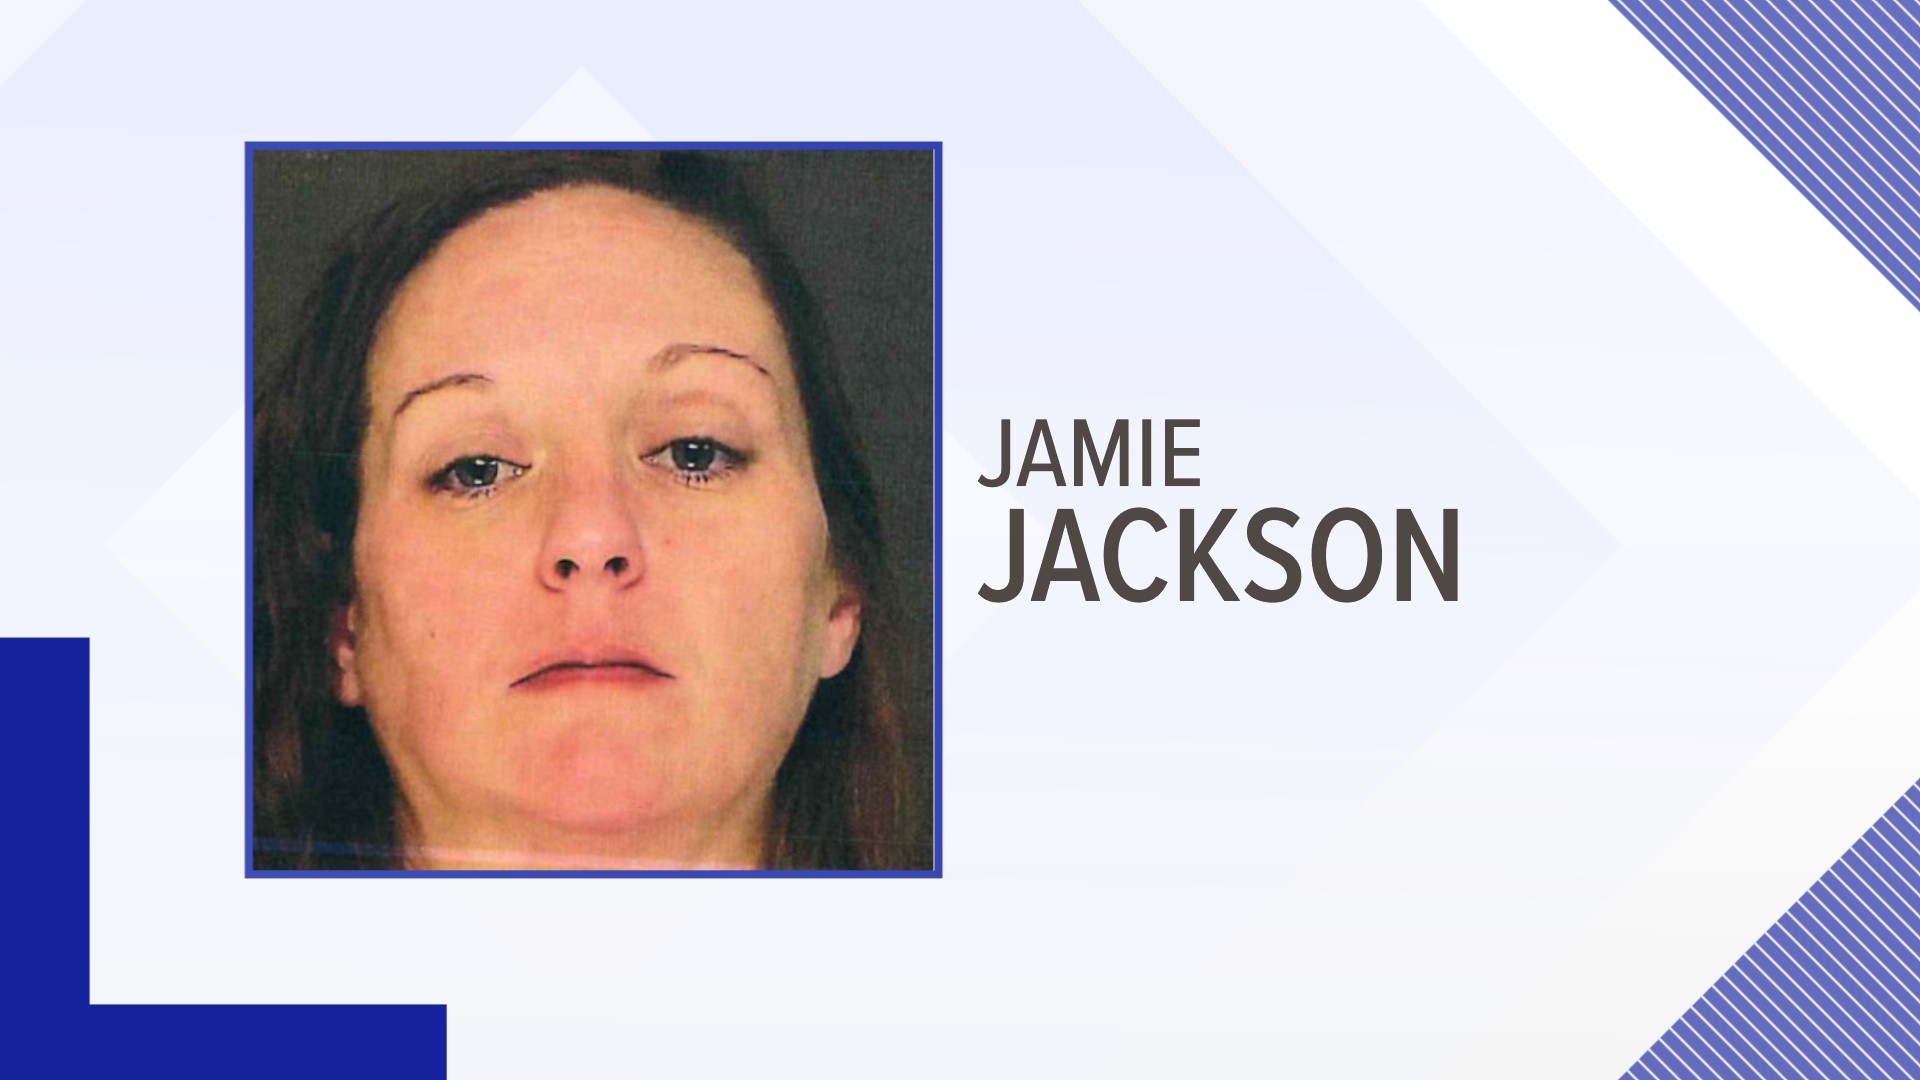 Jamie Jackson, 36, was set to stand trial after allegedly killing her 9-year-old nephew in 2020.